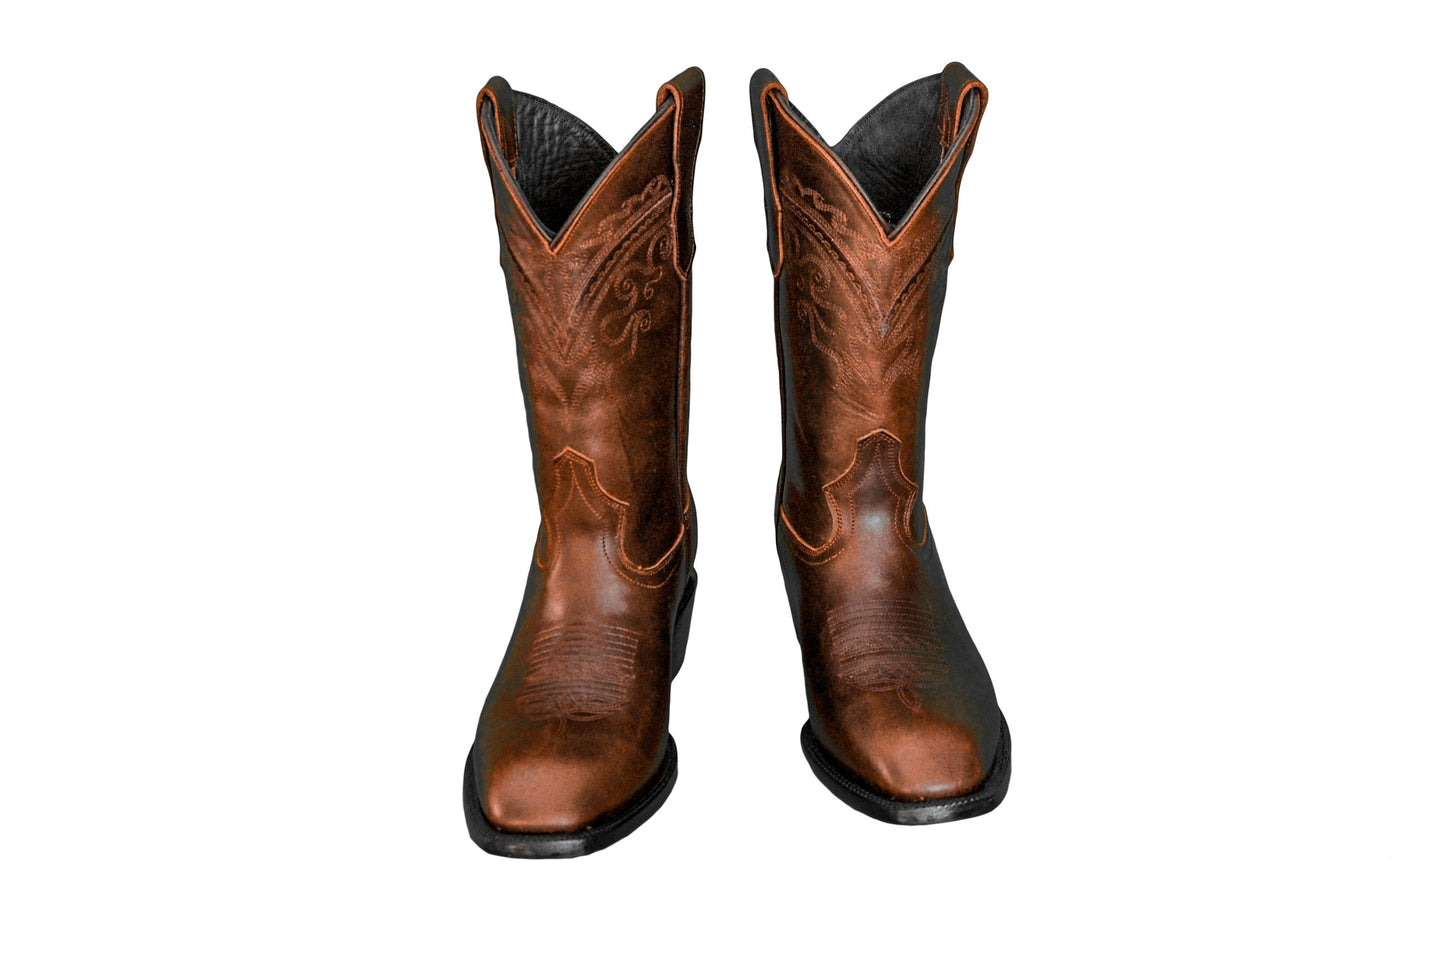 The Tobacco Caramel Boots